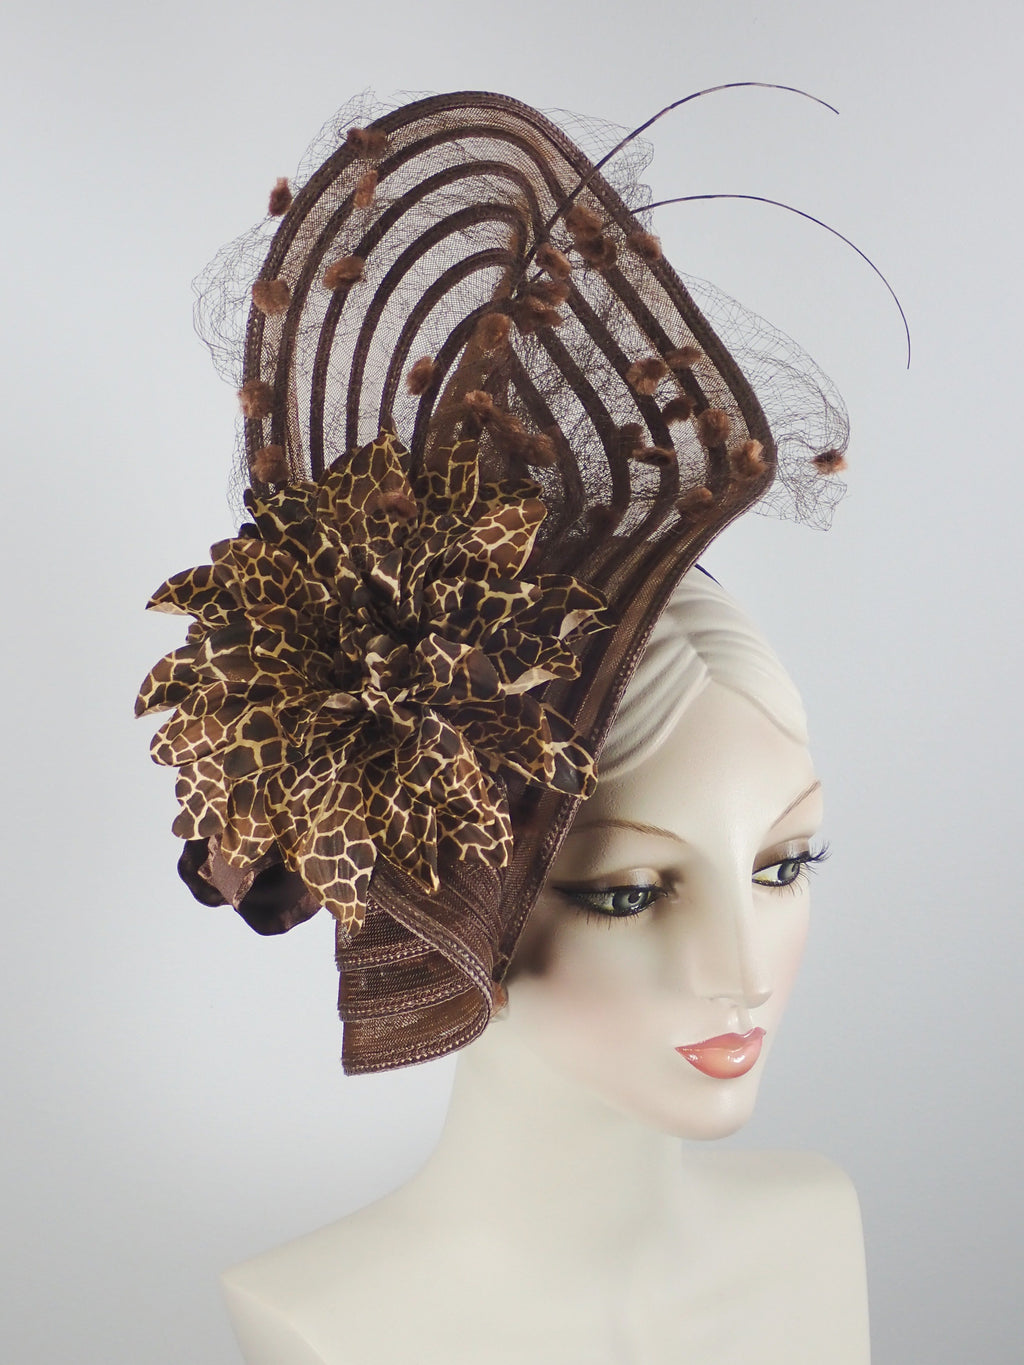 Dramatic Fascinator hat in brown by What a Great Hat